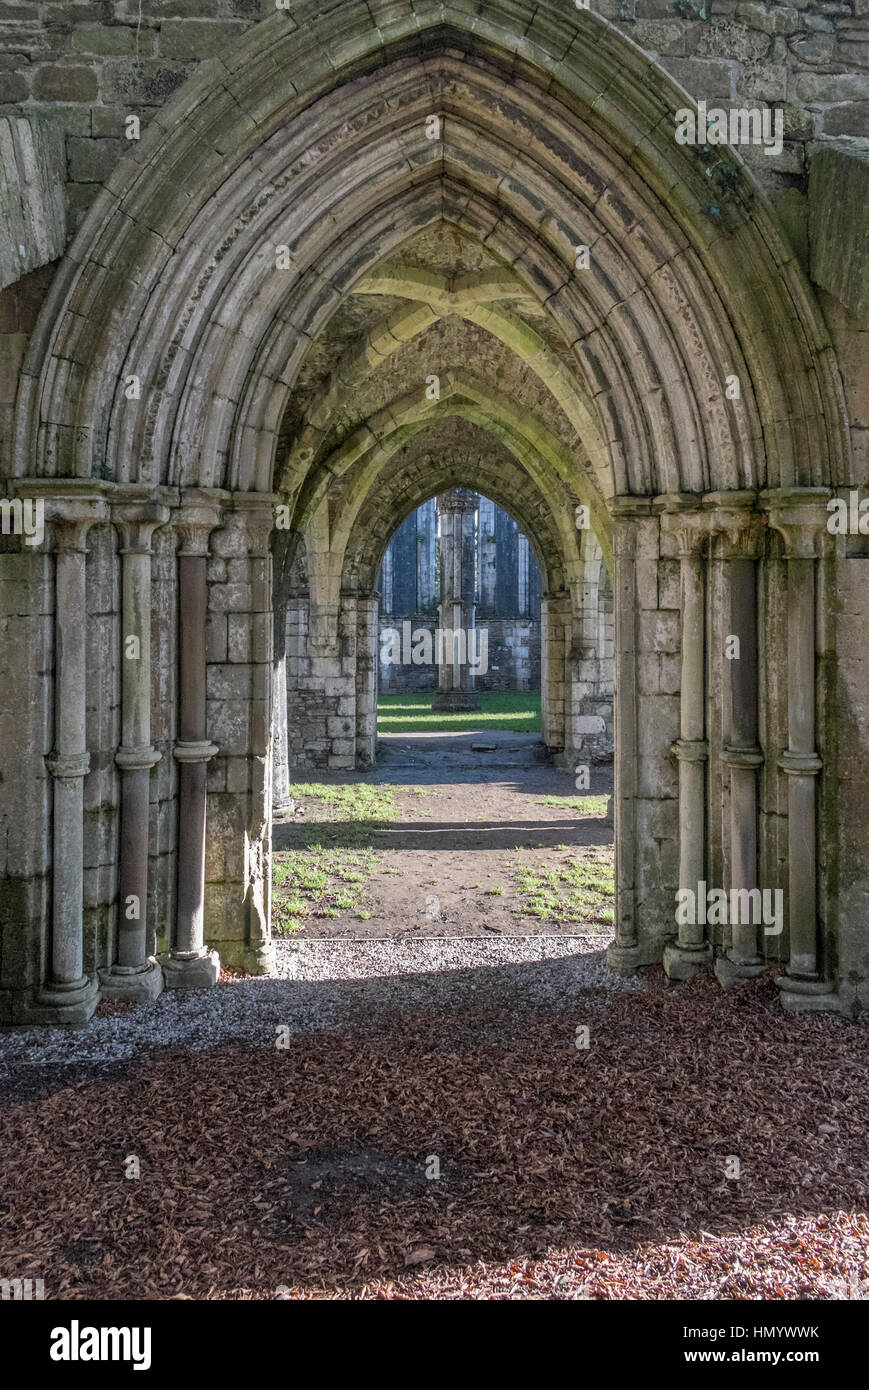 The arches of the Chapter House, part of Margam Country Estate, Wales. Stock Photo